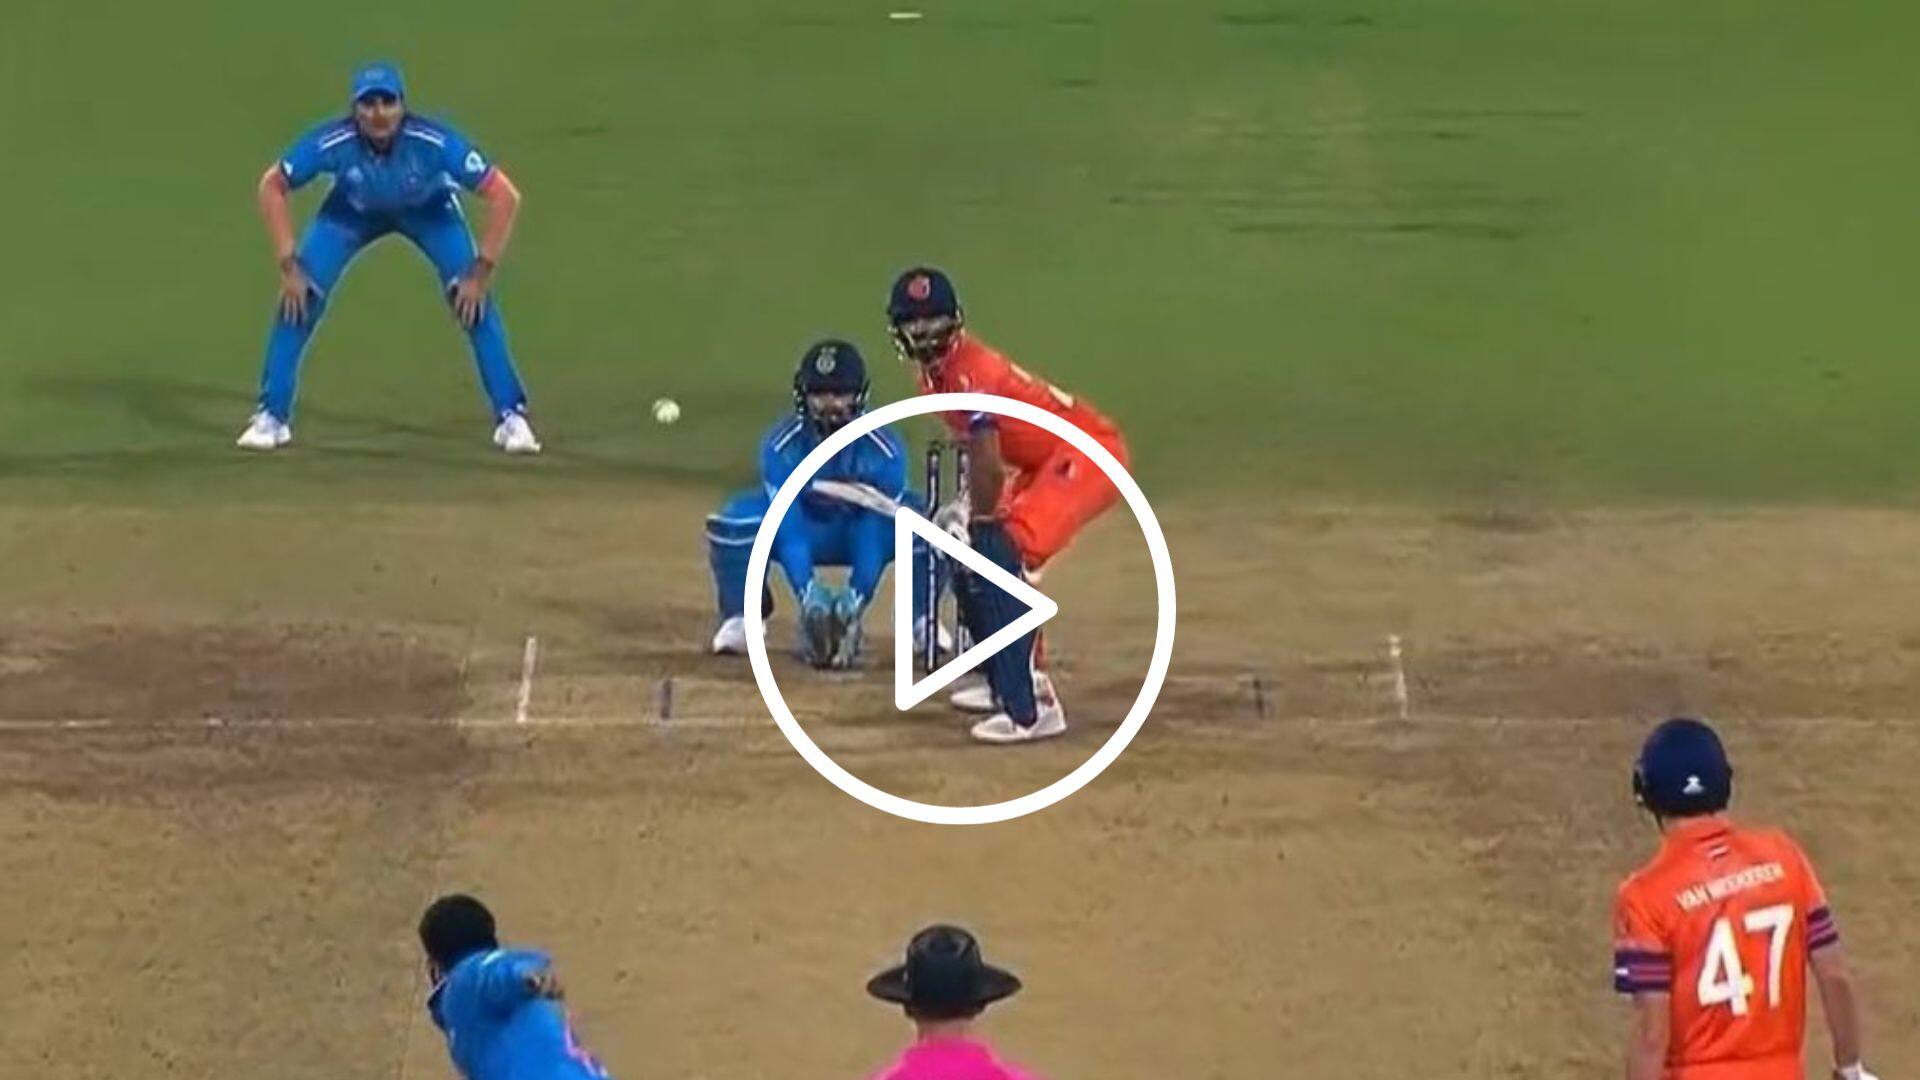 [Watch] Rohit Sharma Picks Wicket In His 'Dream Bowling Comeback' After Kohli Magic